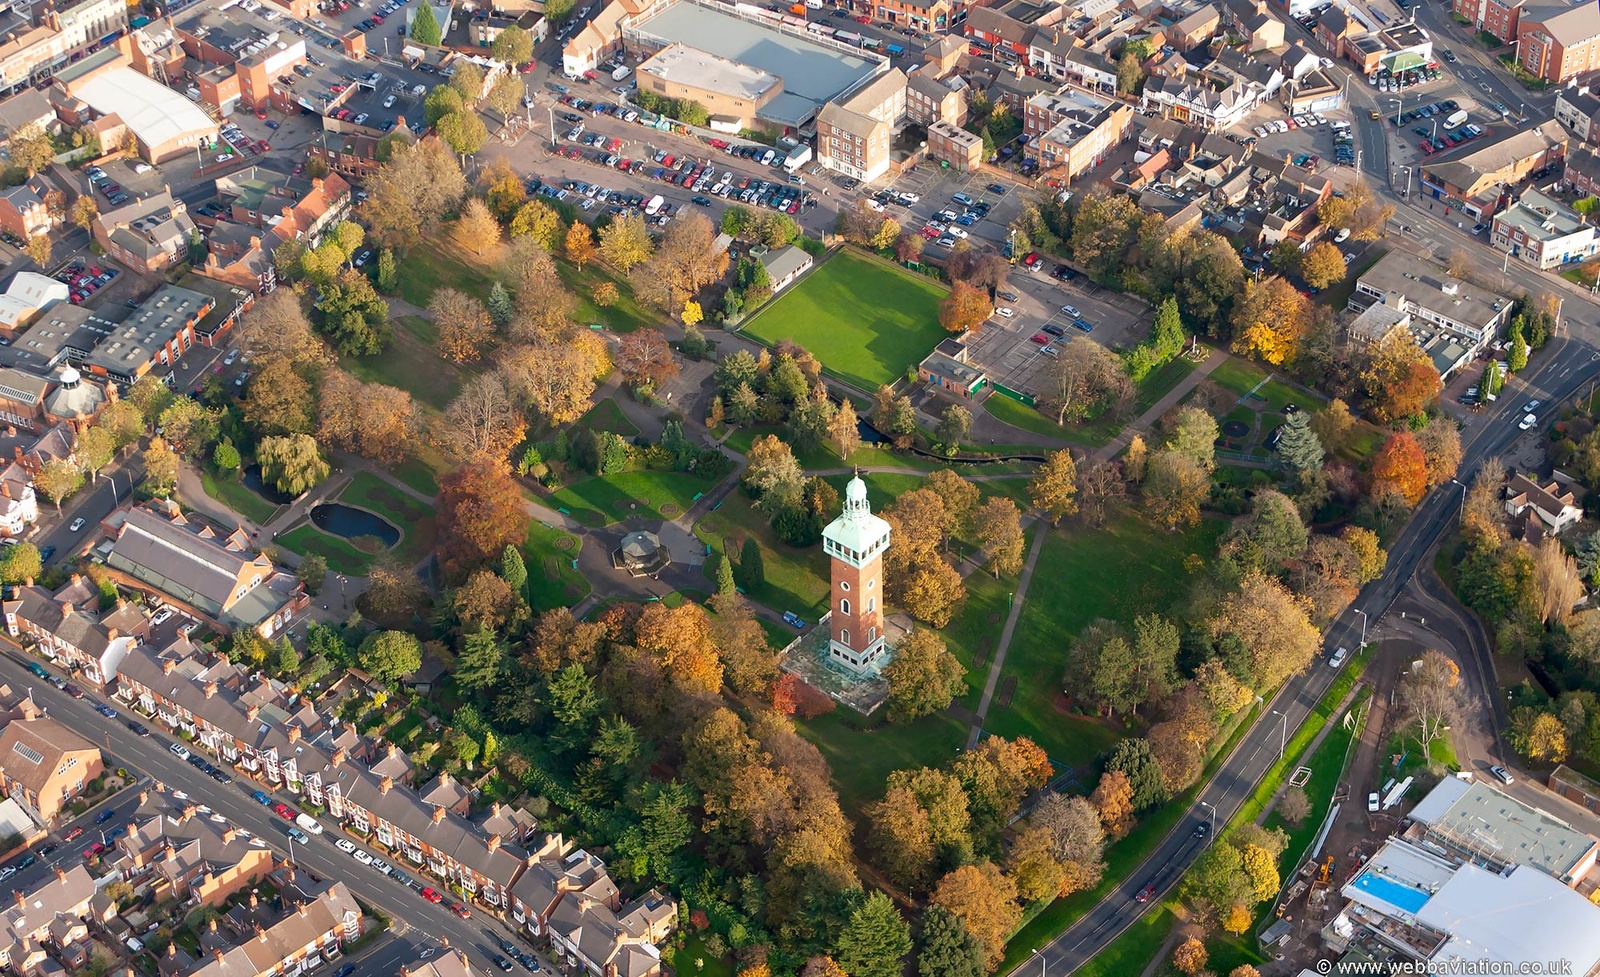 Queen's Park Loughborough  from the air